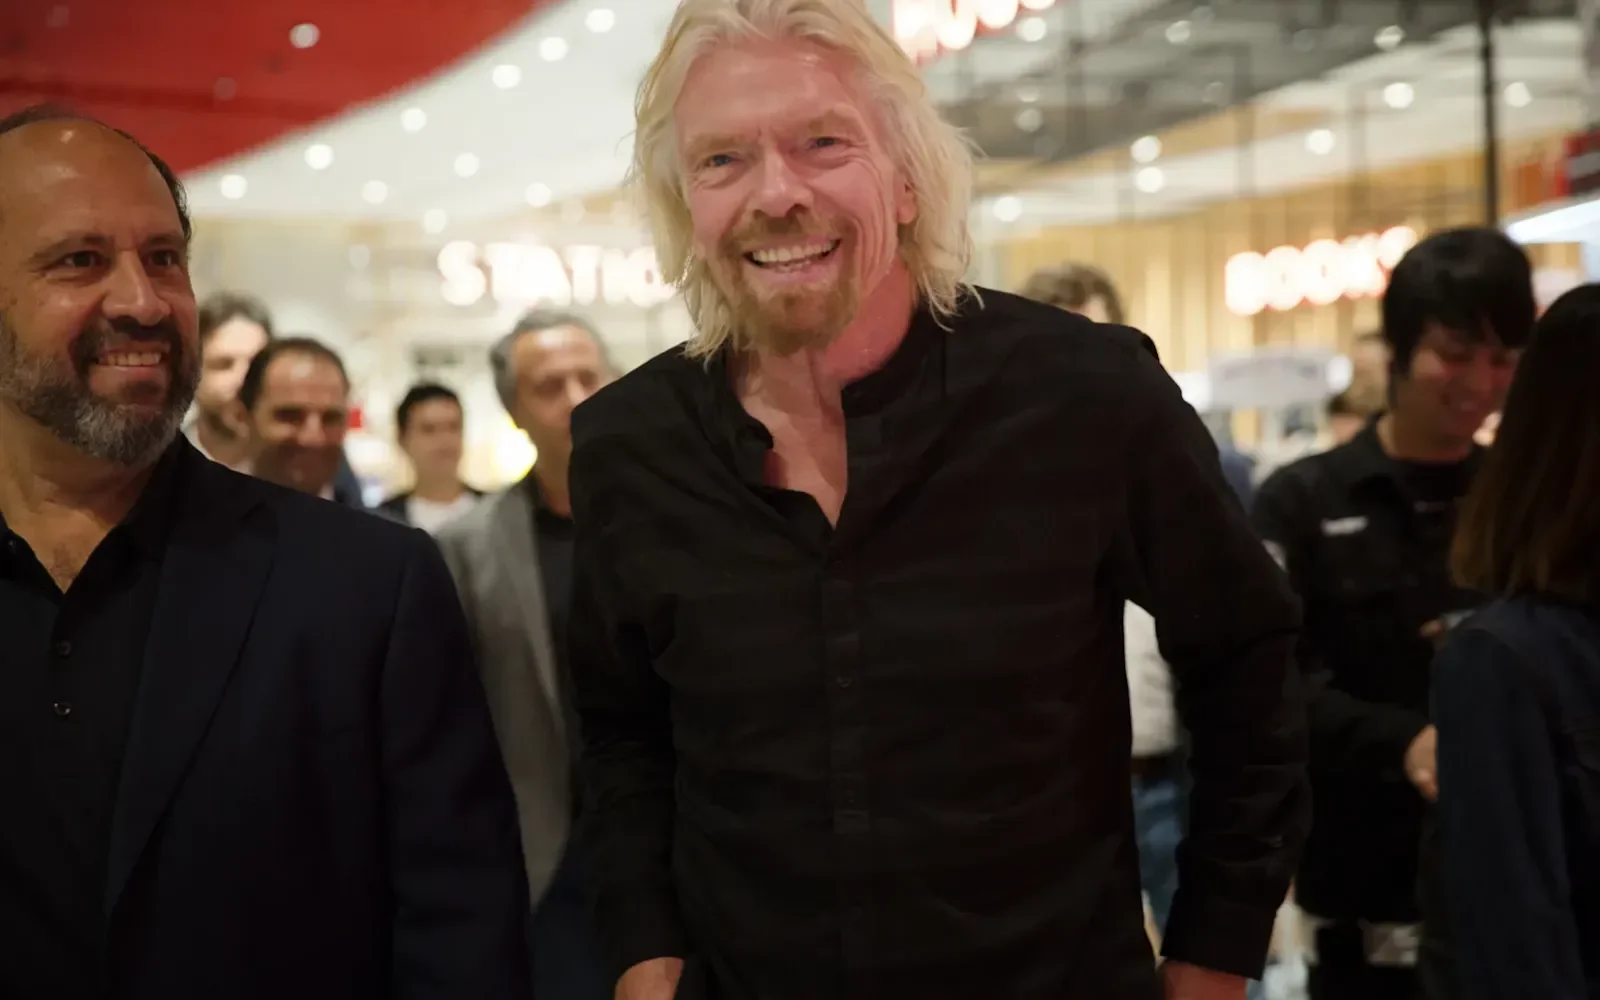 Richard Branson smiling at the camera, surrounded by a crowd of people 